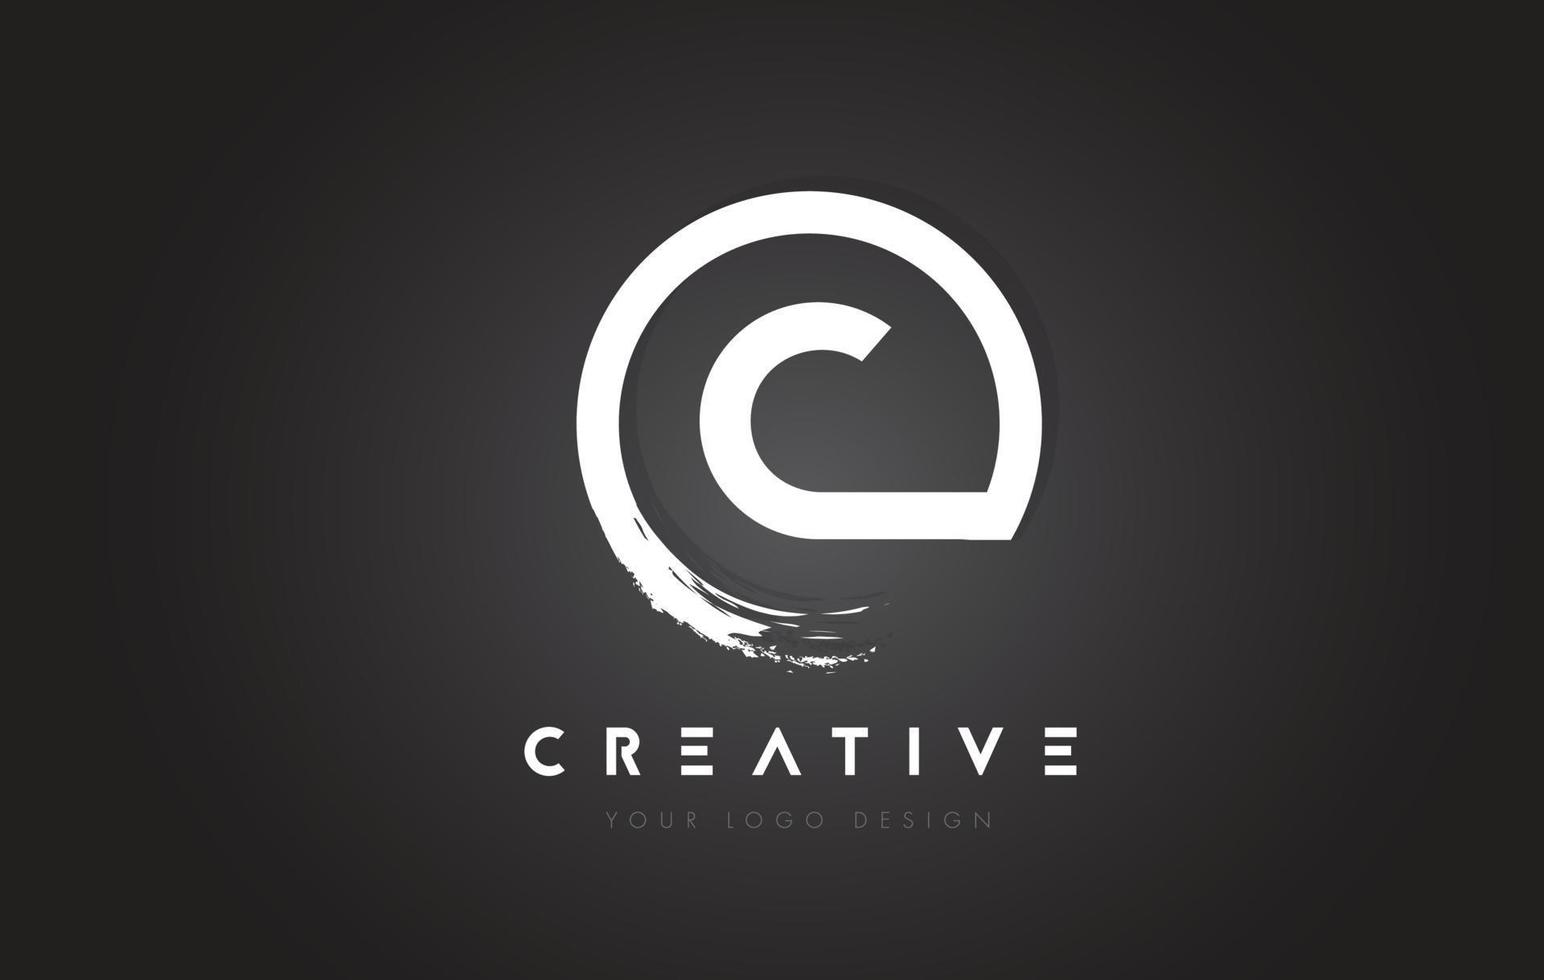 C Circular Letter Logo with Circle Brush Design and Black Background. vector